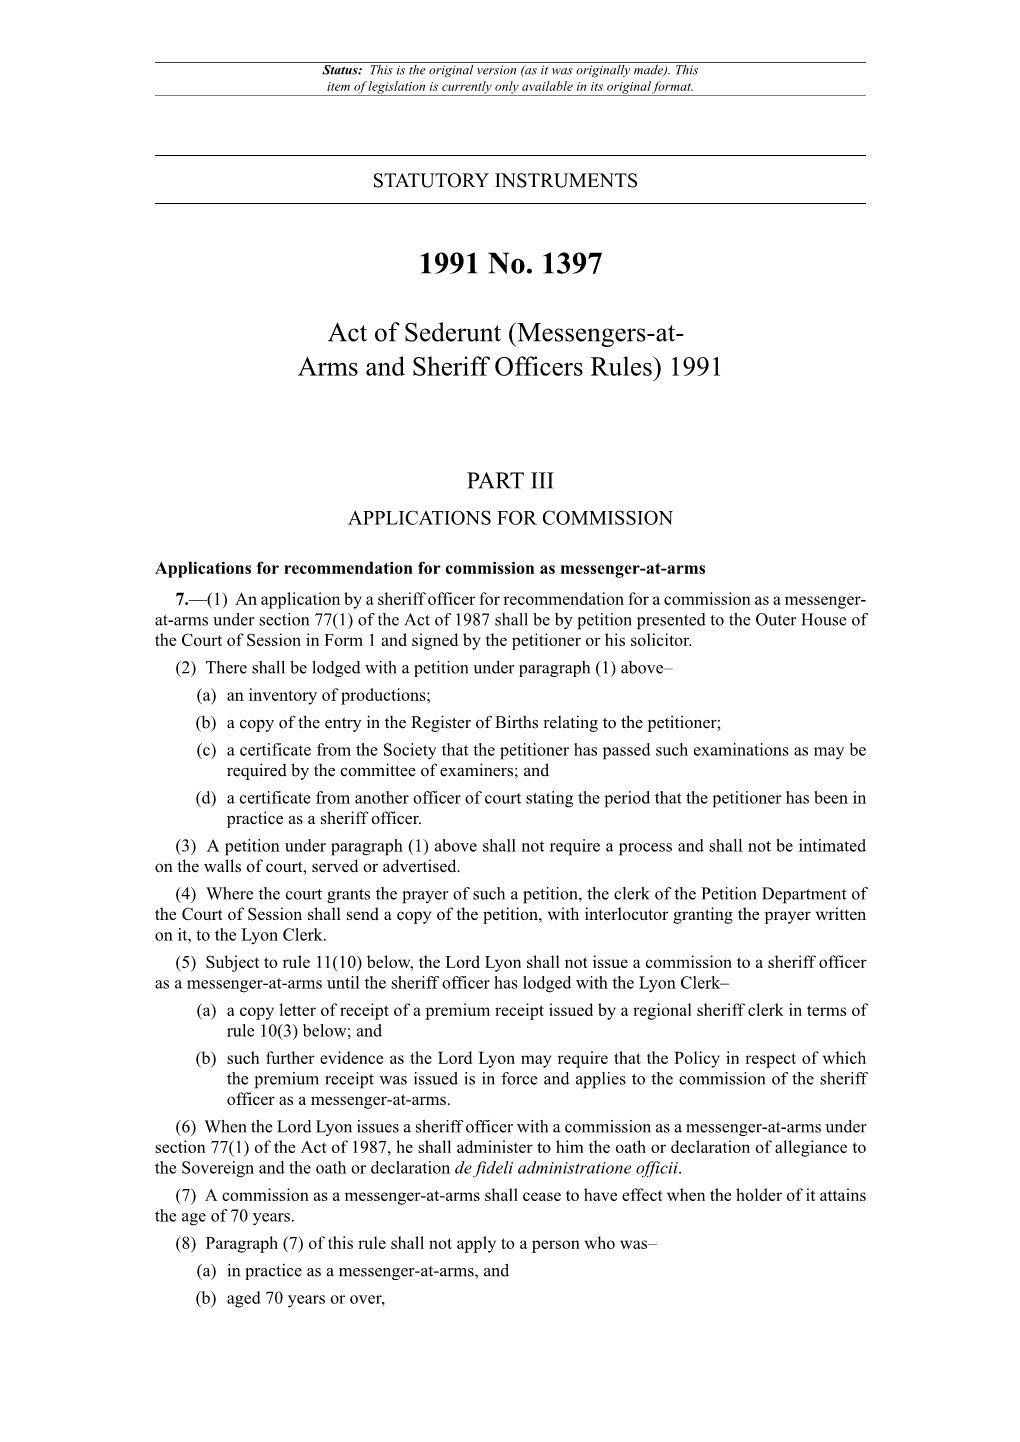 Act of Sederunt (Messengers-At-Arms and Sheriff Officers Rules) 1991